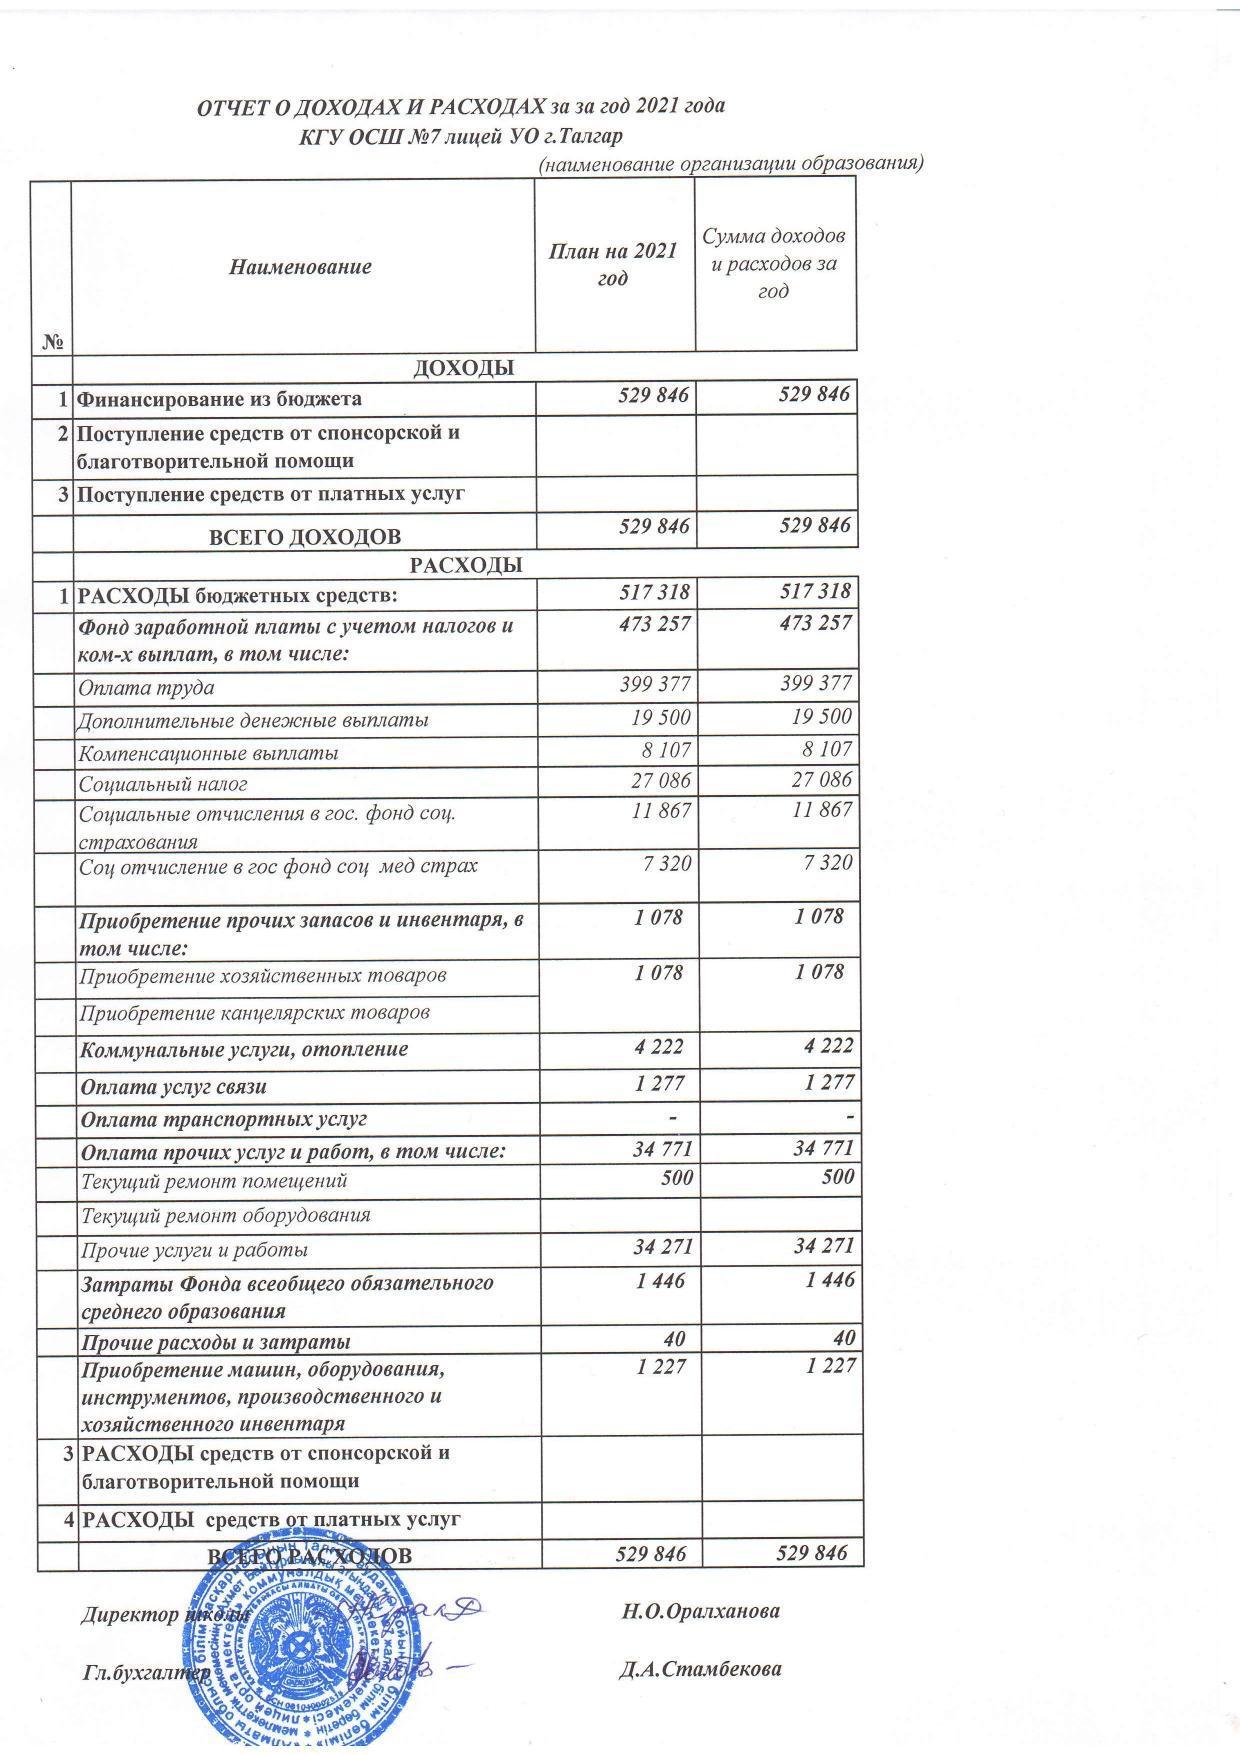 Statement of income and expenses